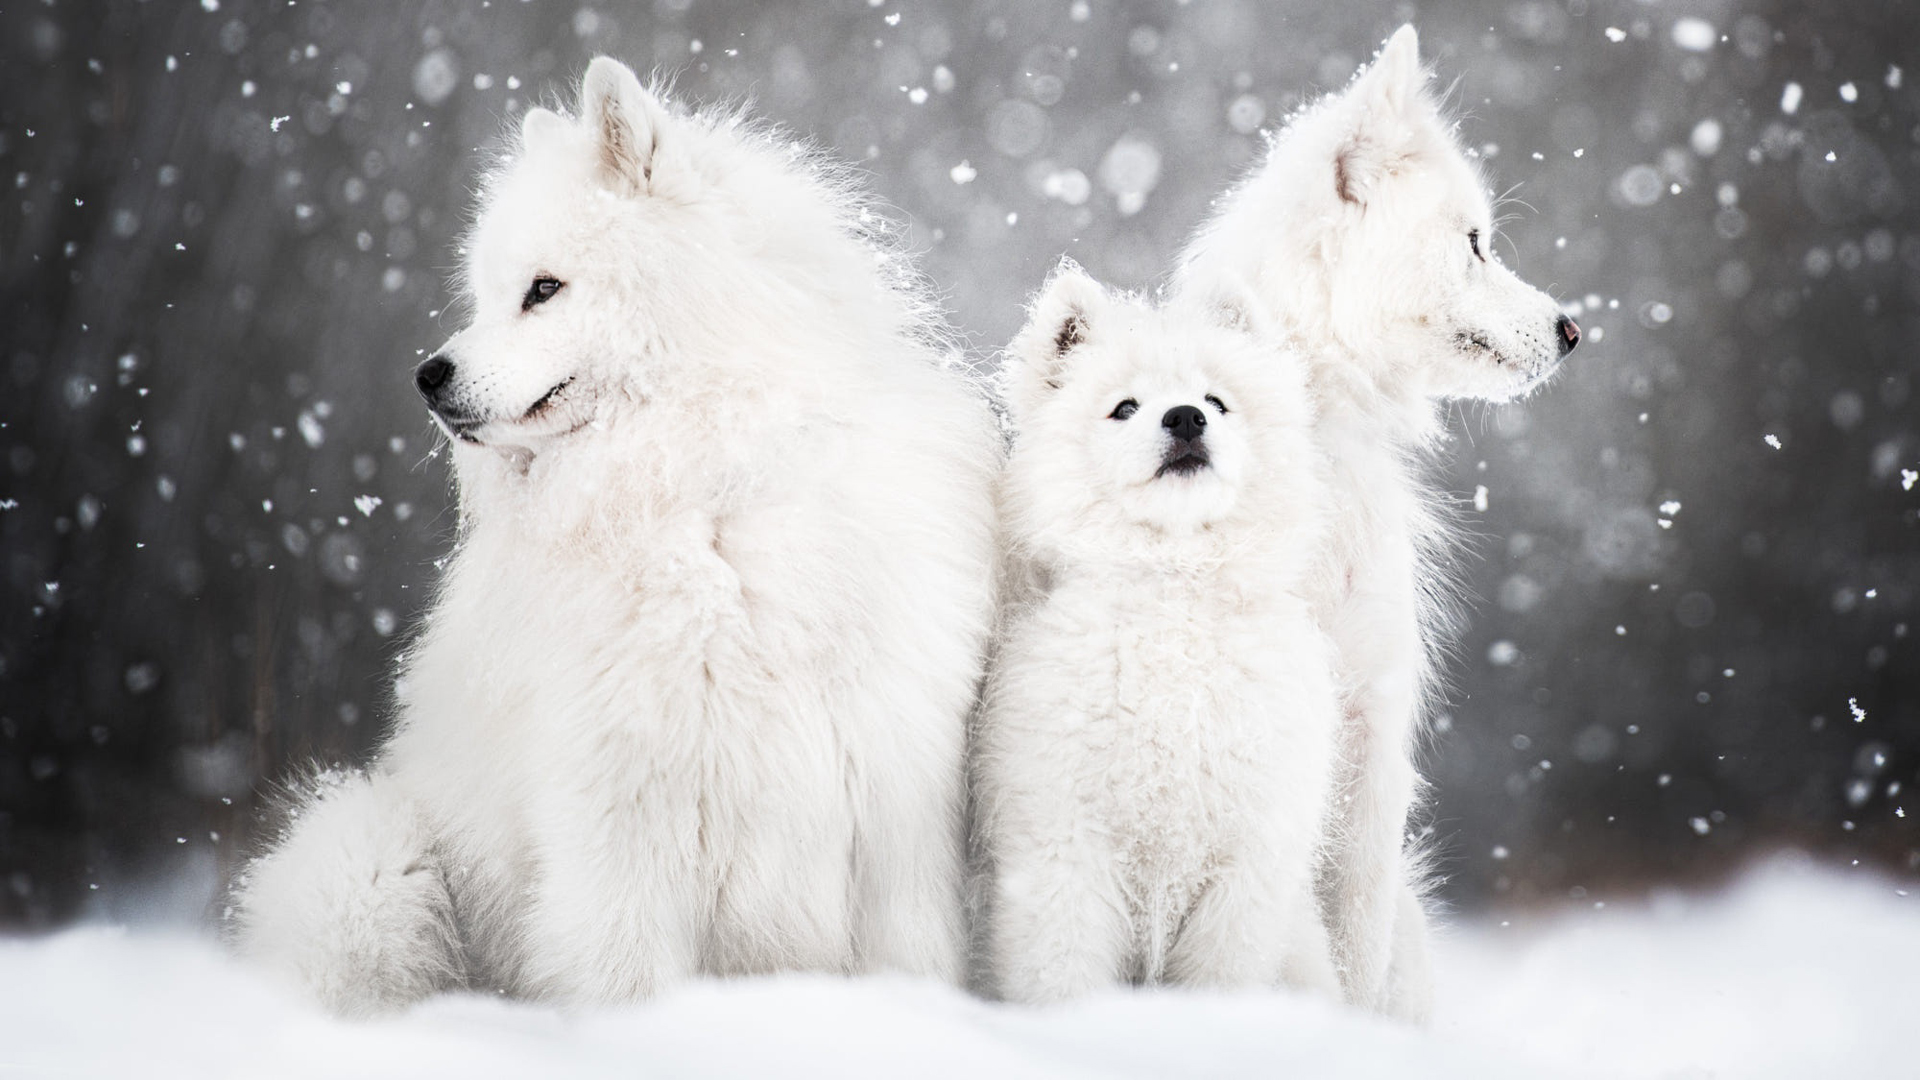 Three Samoyed Cub Dog Puppies Are Sitting On Snow In Snow Falling Wallpaper HD Dogs